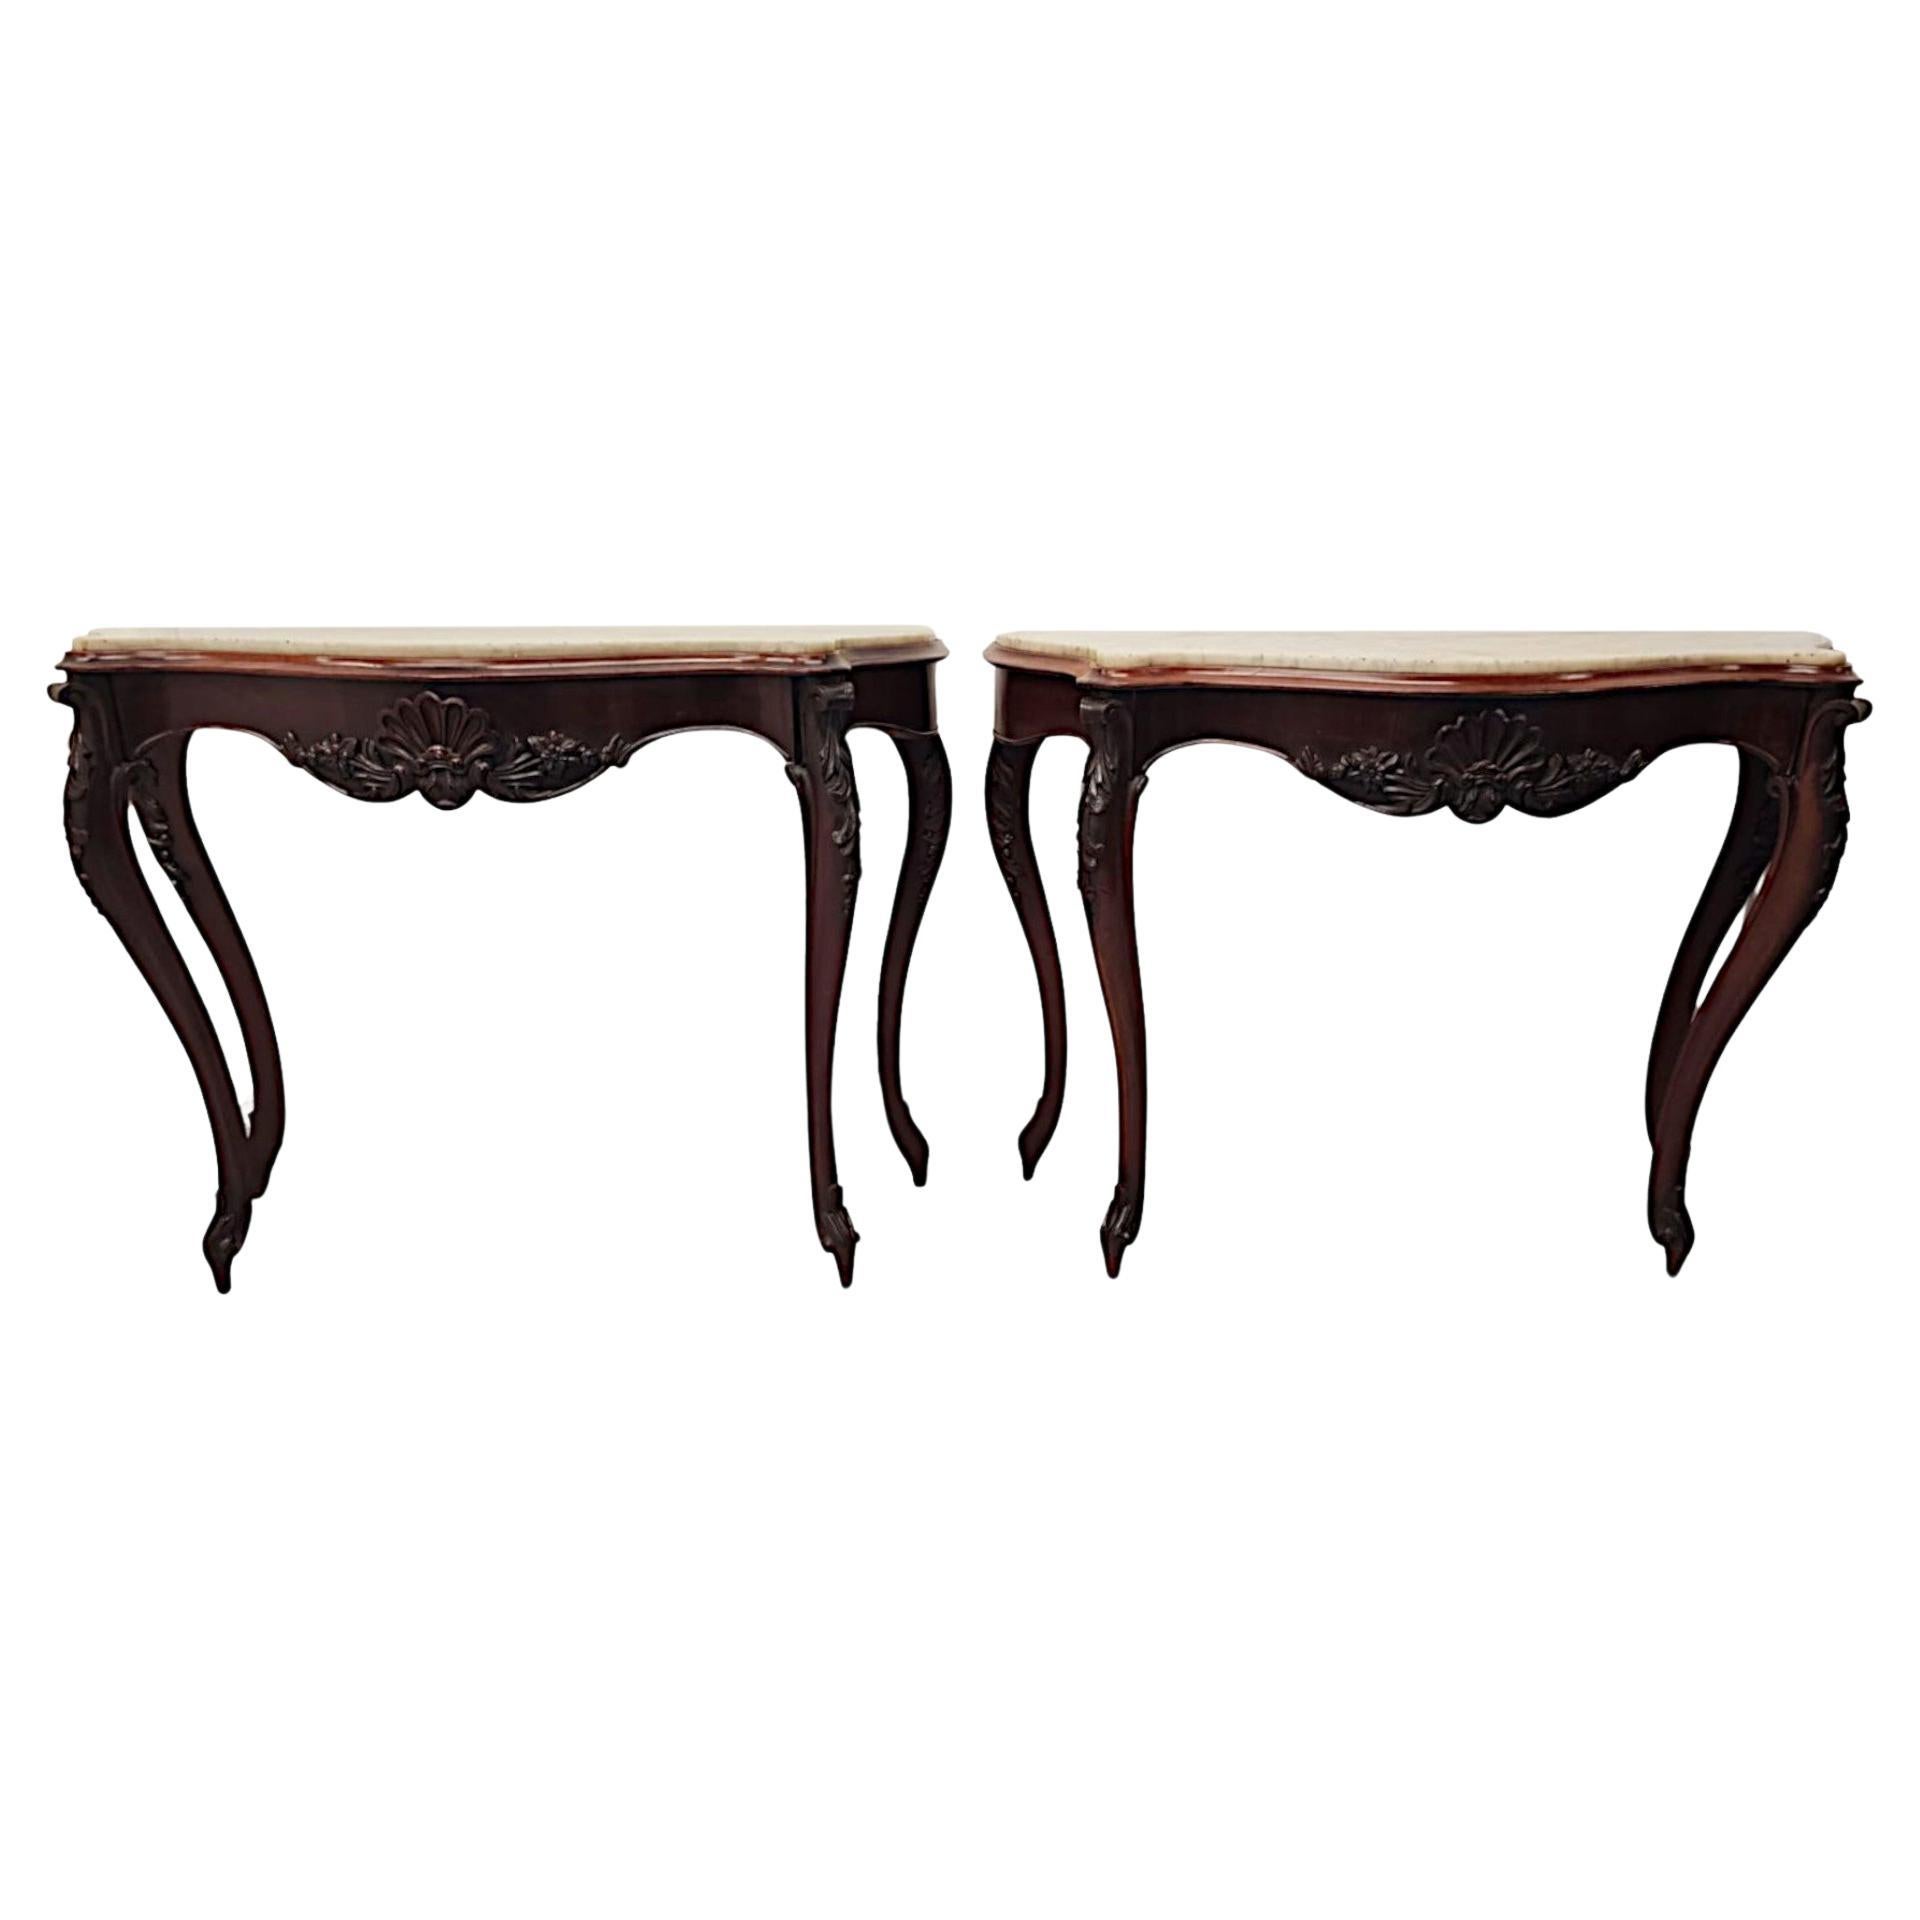 A Very Rare Pair of 19th Century Marble Top Console Tables For Sale